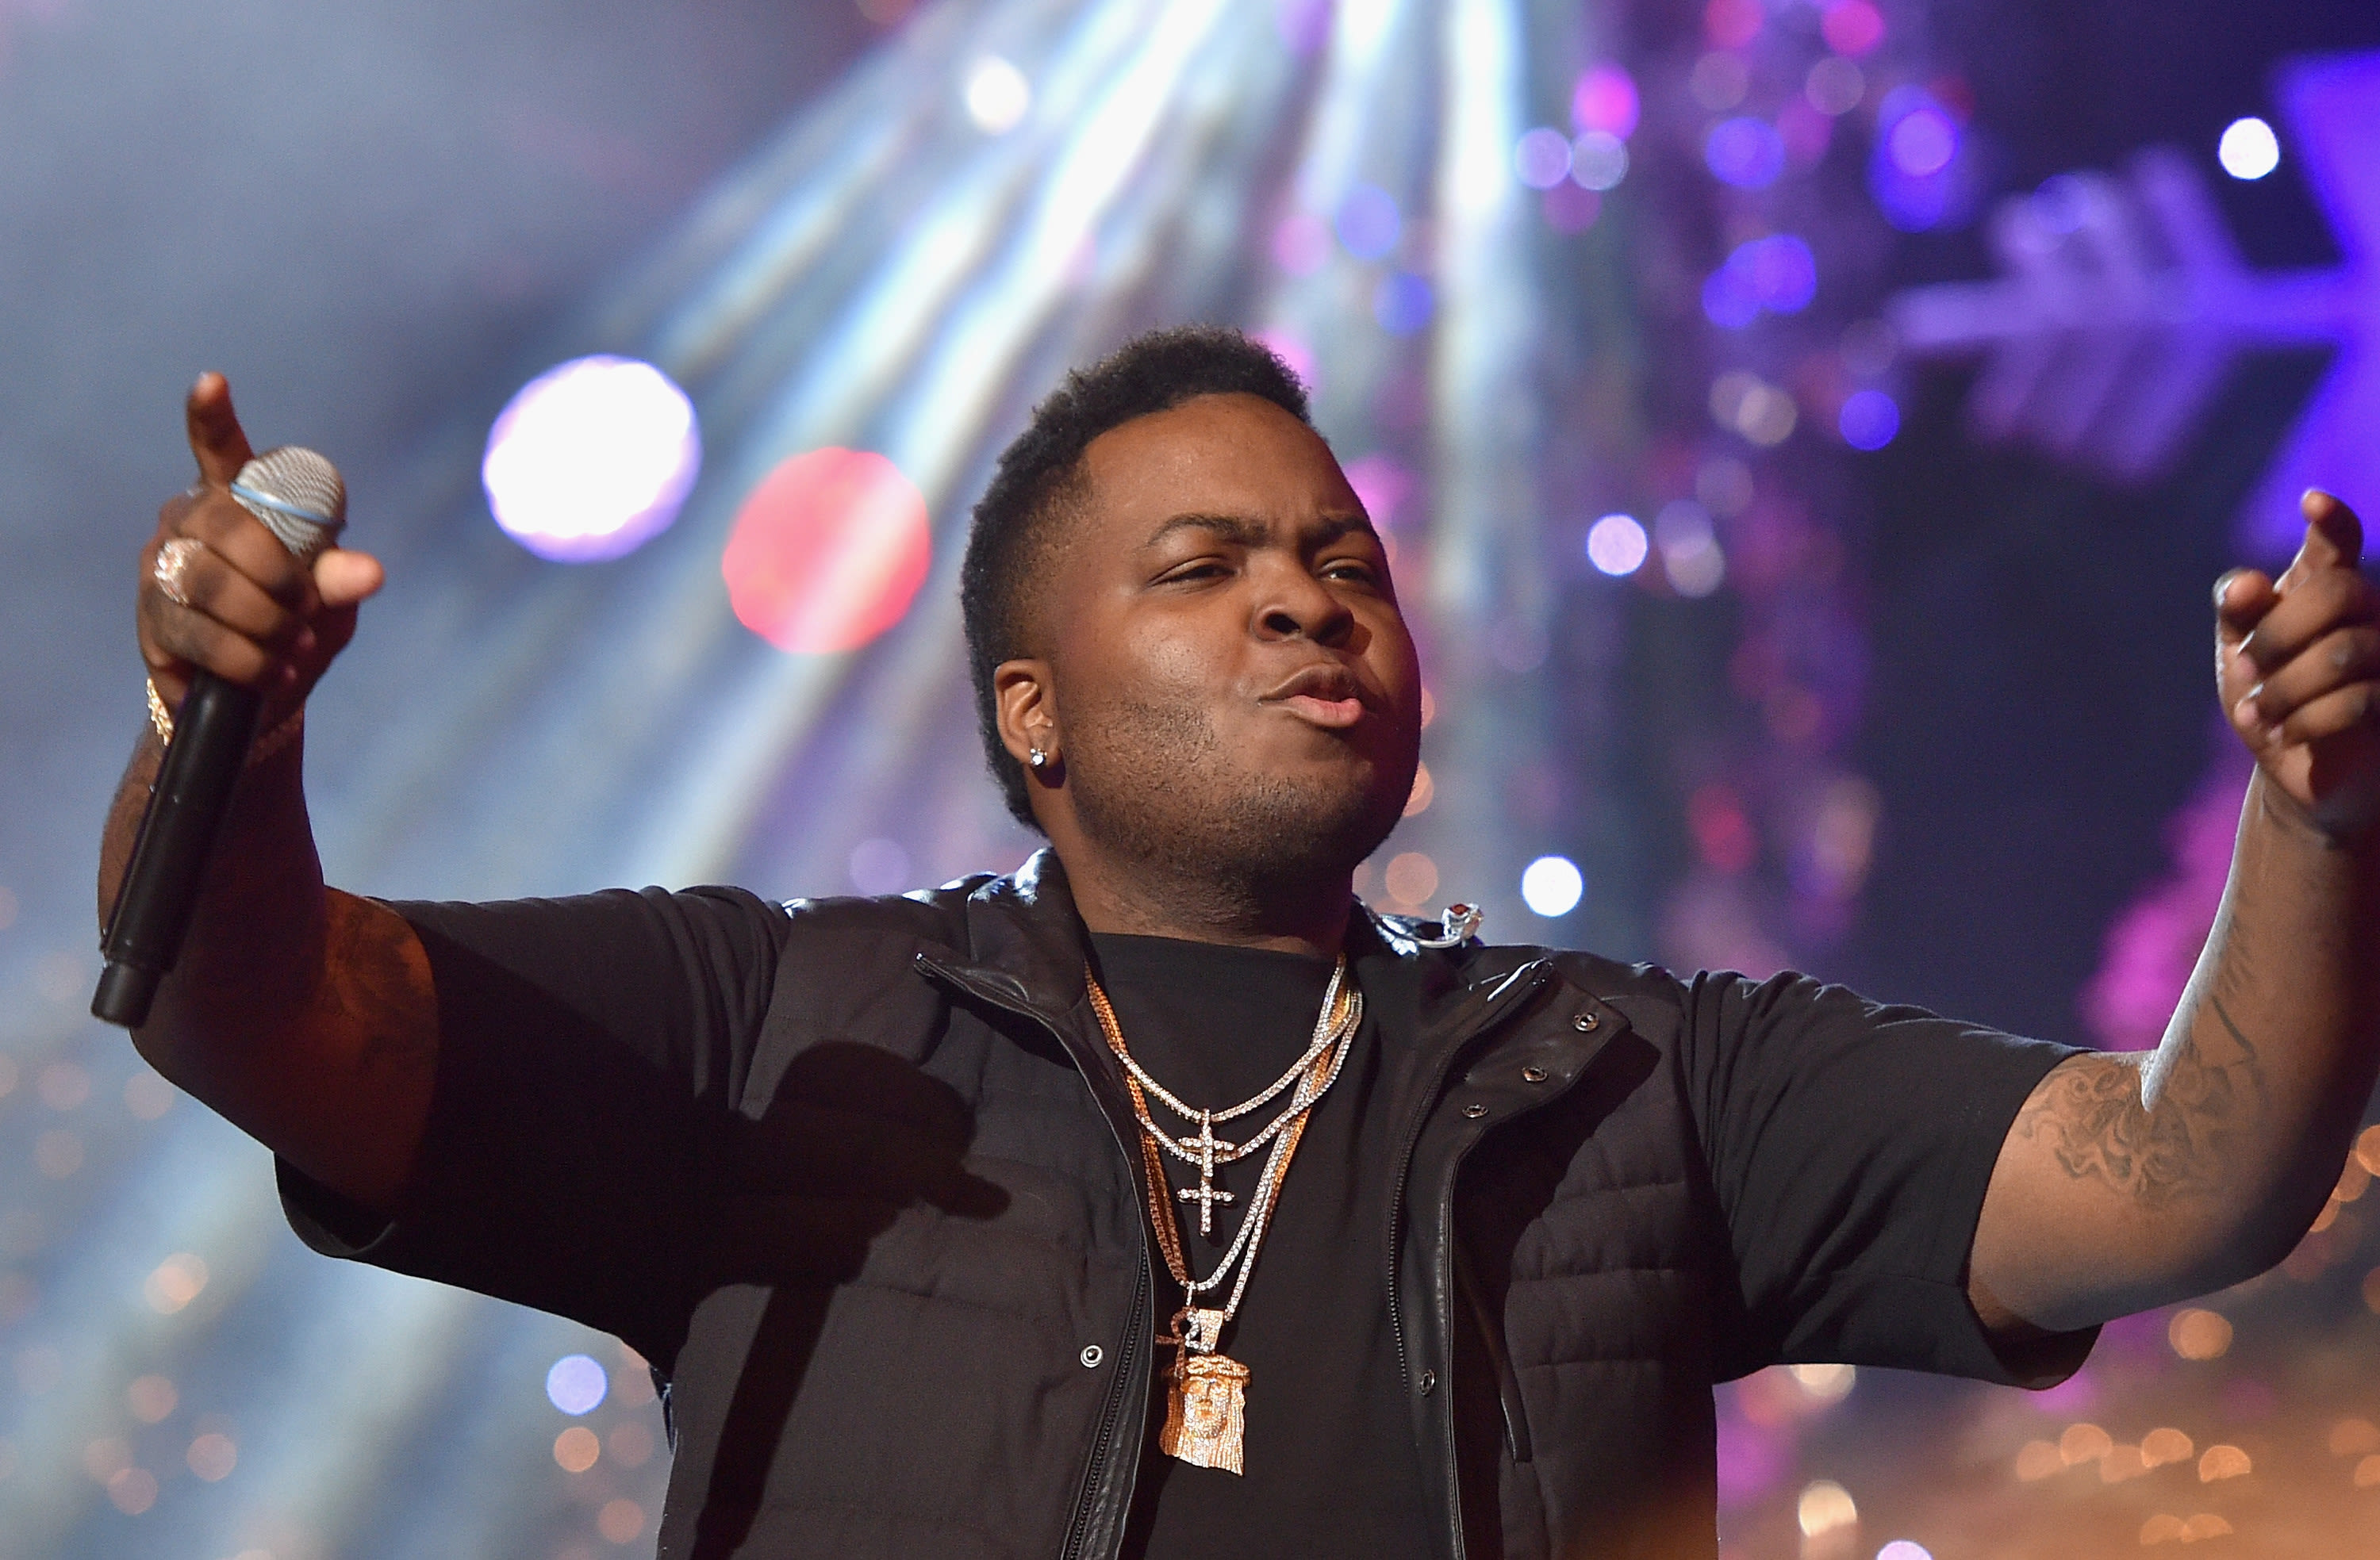 Rapper Sean Kingston, his mother arrested on fraud charges after SWAT raid at his South Florida home